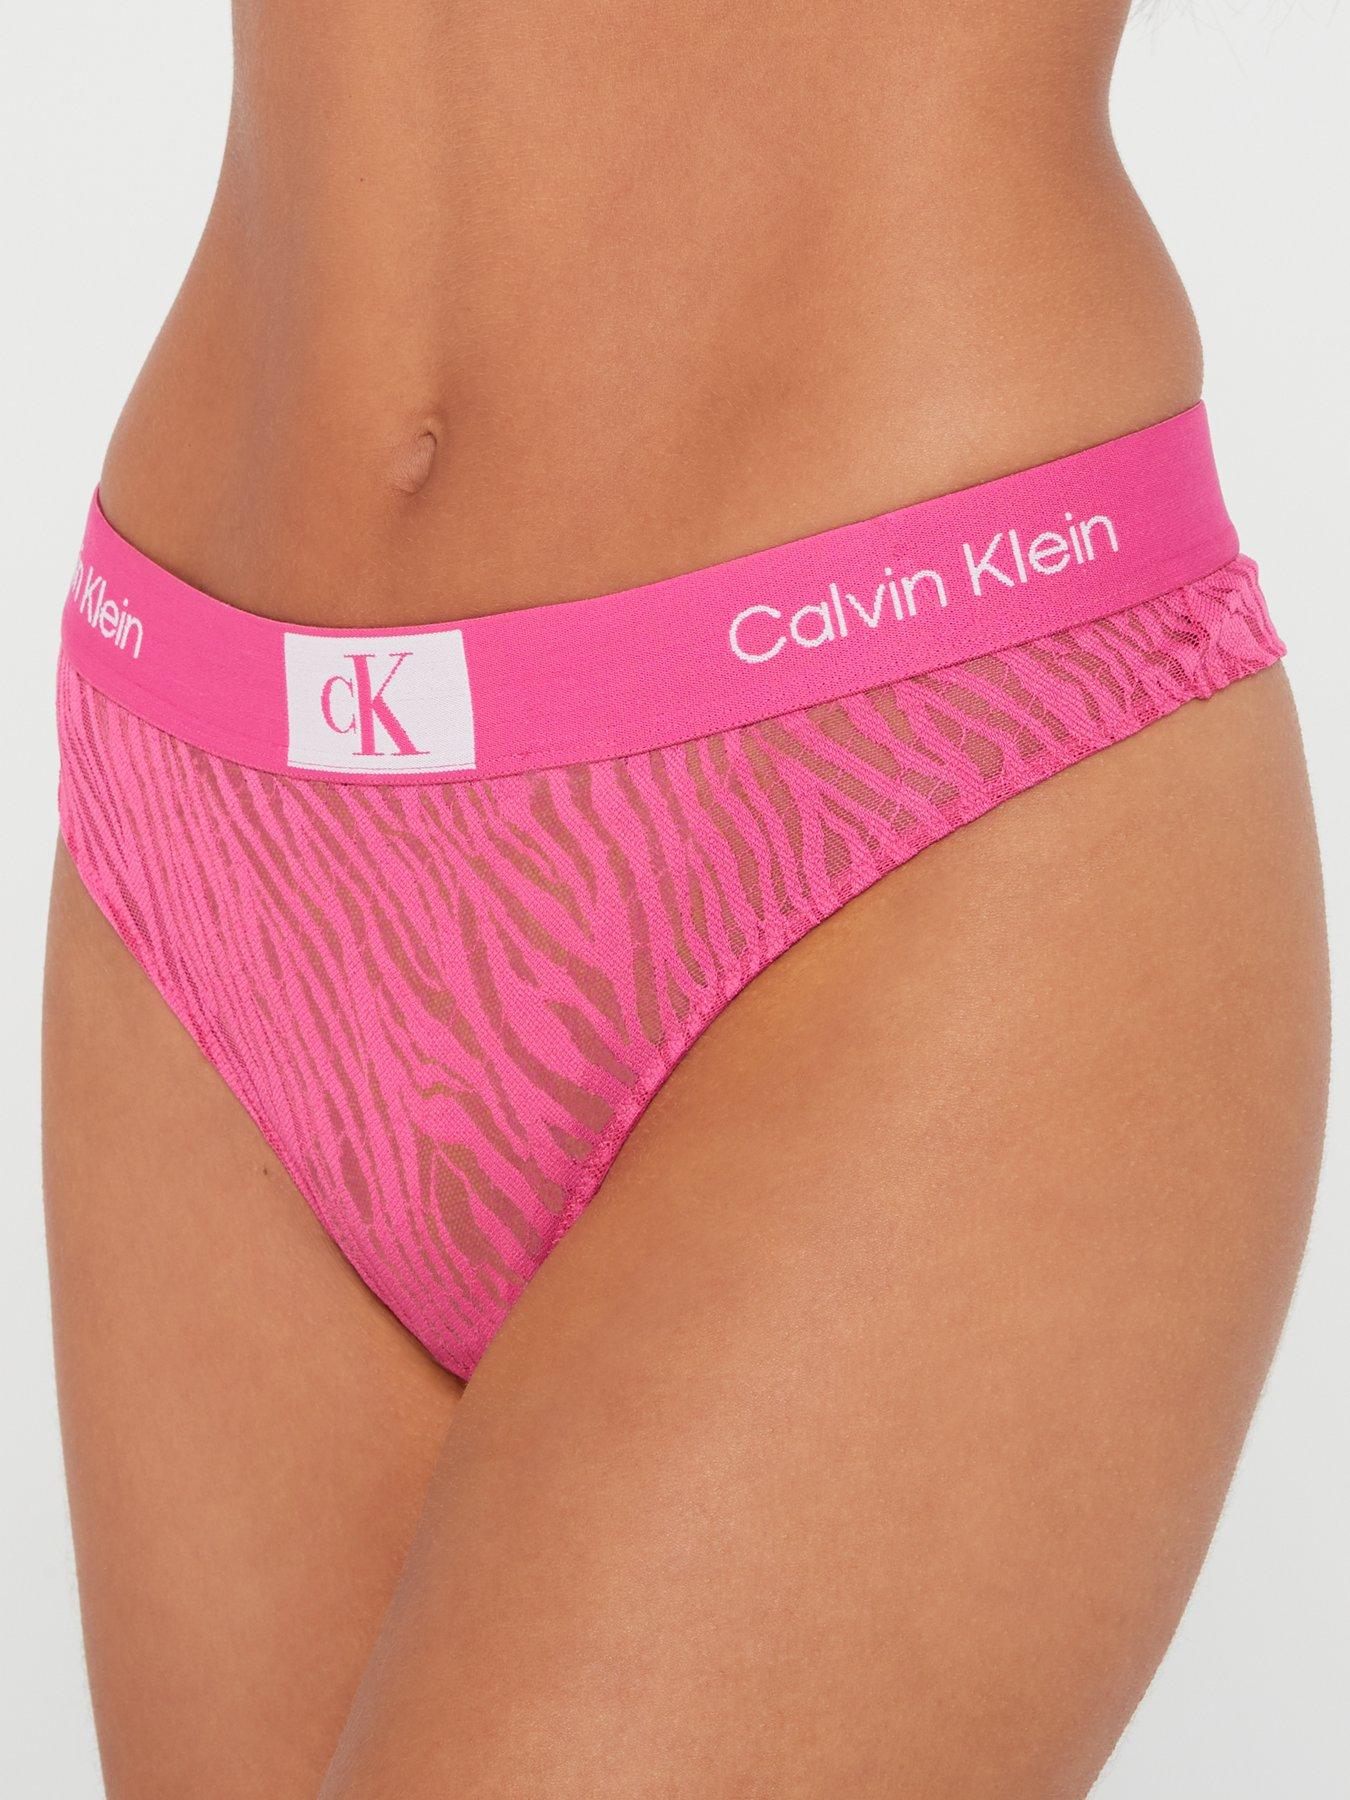 Calvin Klein Plus Size CK One Cotton Thong In Peach Leopard Print-Pink for  Women